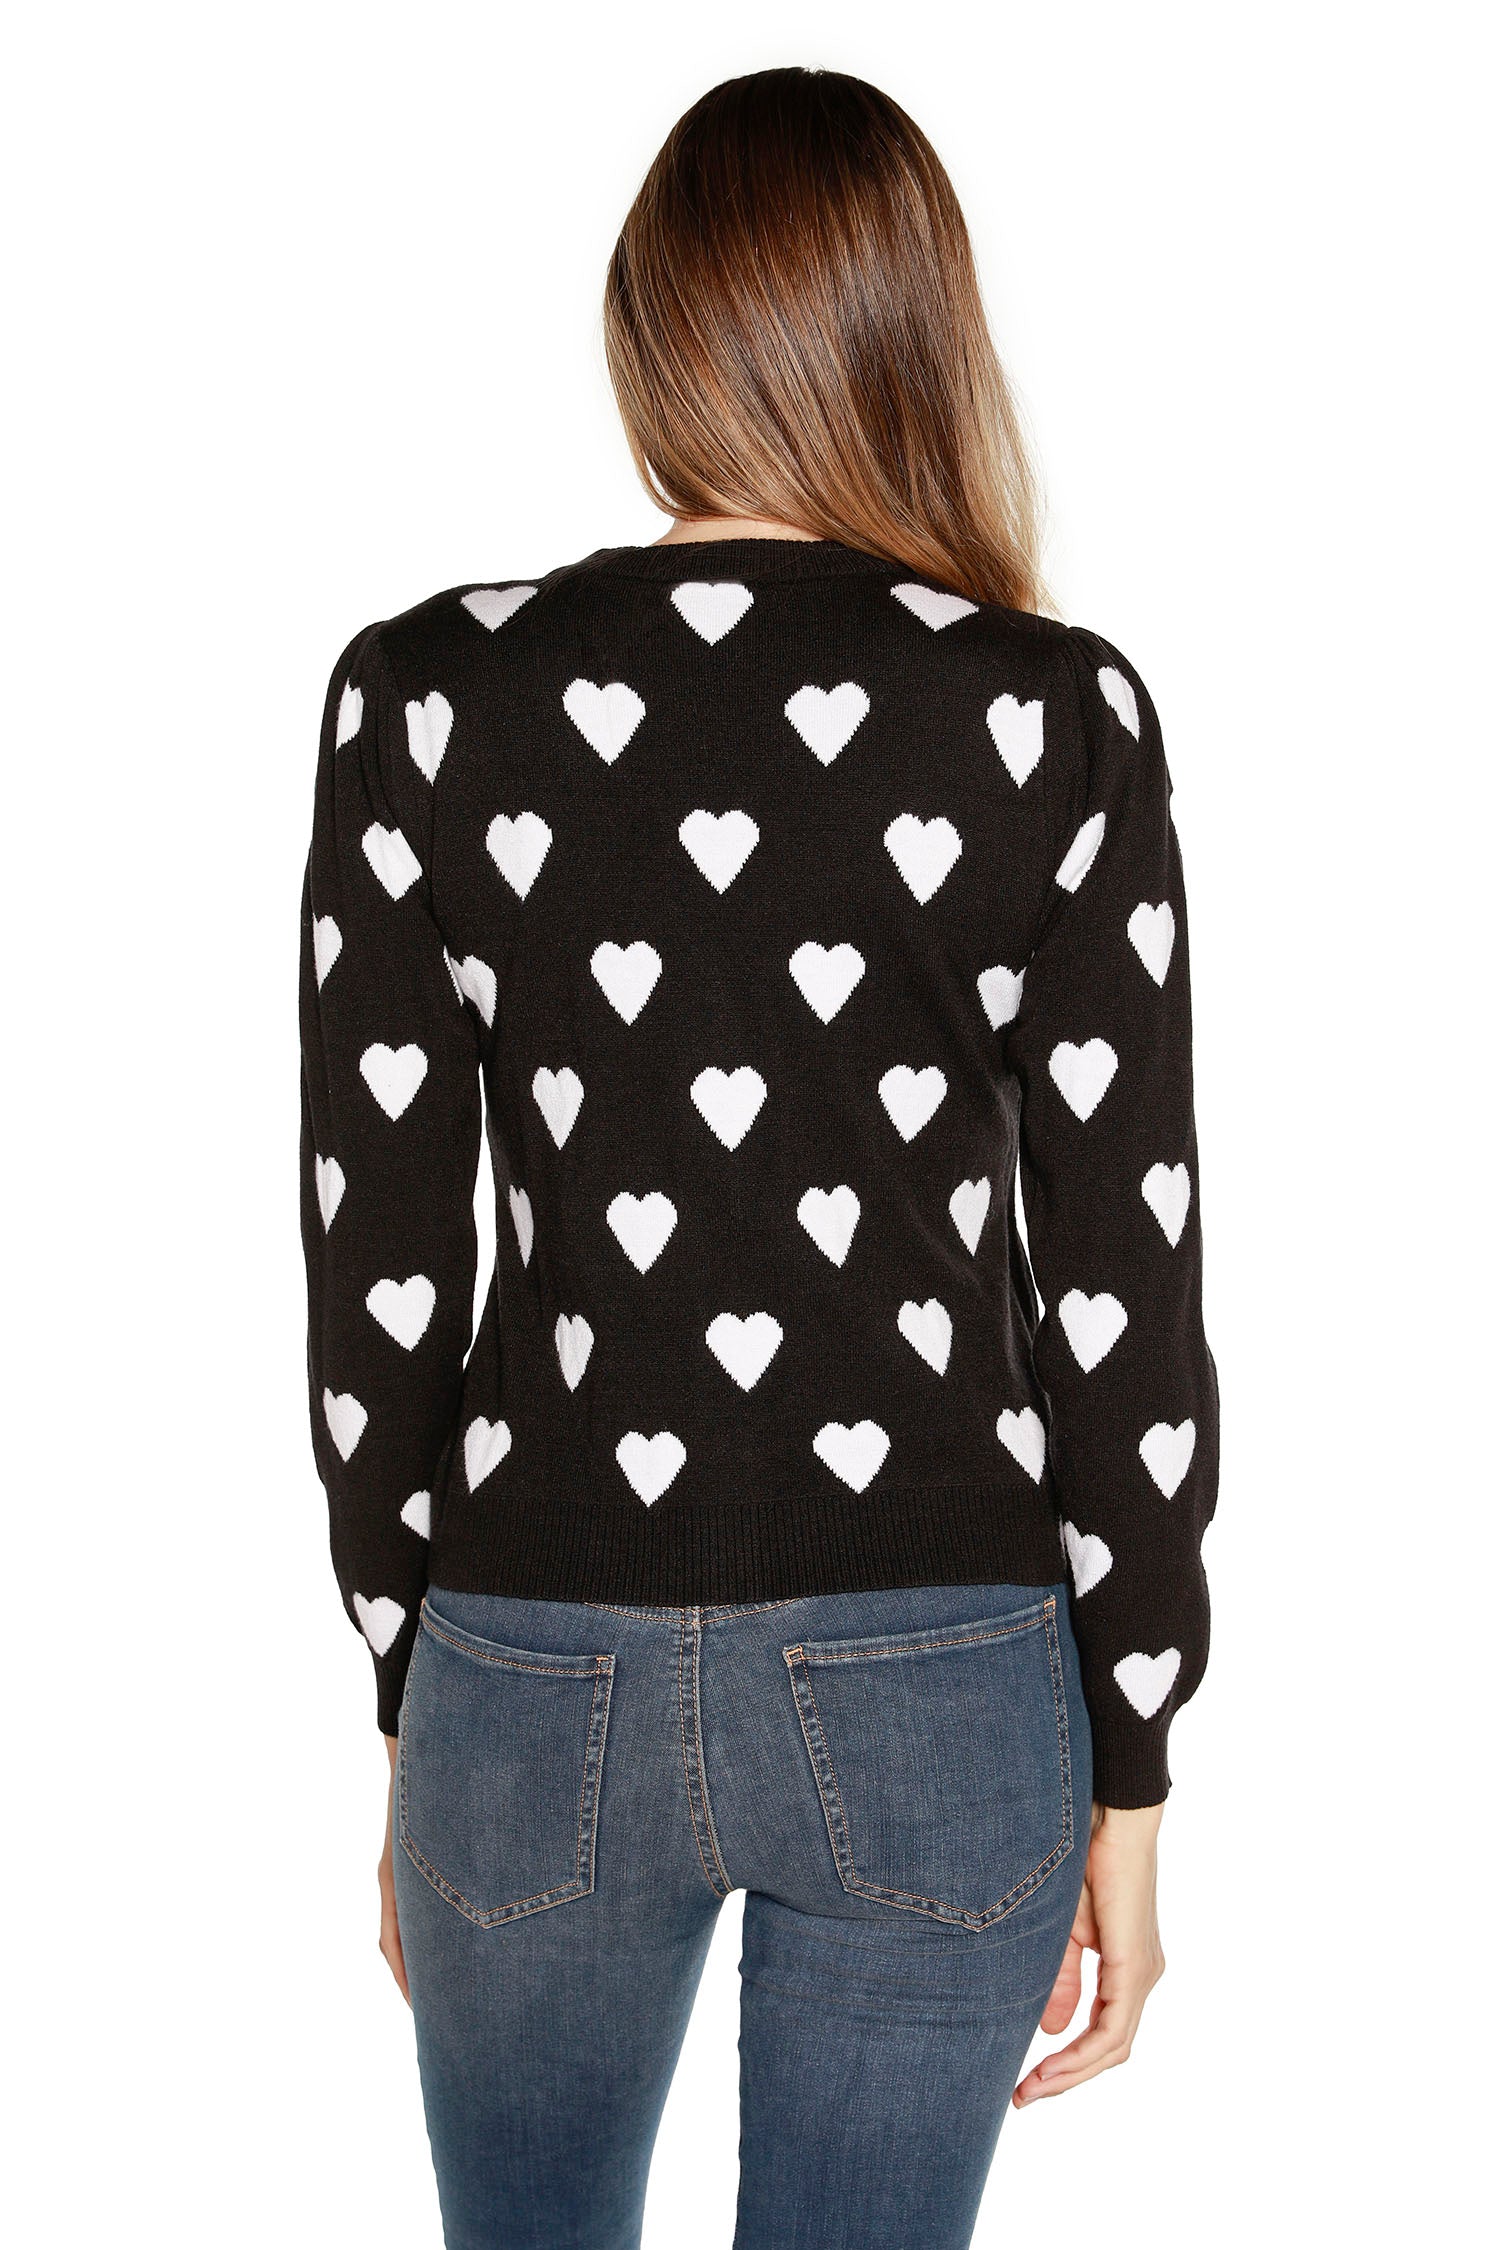 Women's Jacquard Button Up Sweater Cardigan with Heart Design